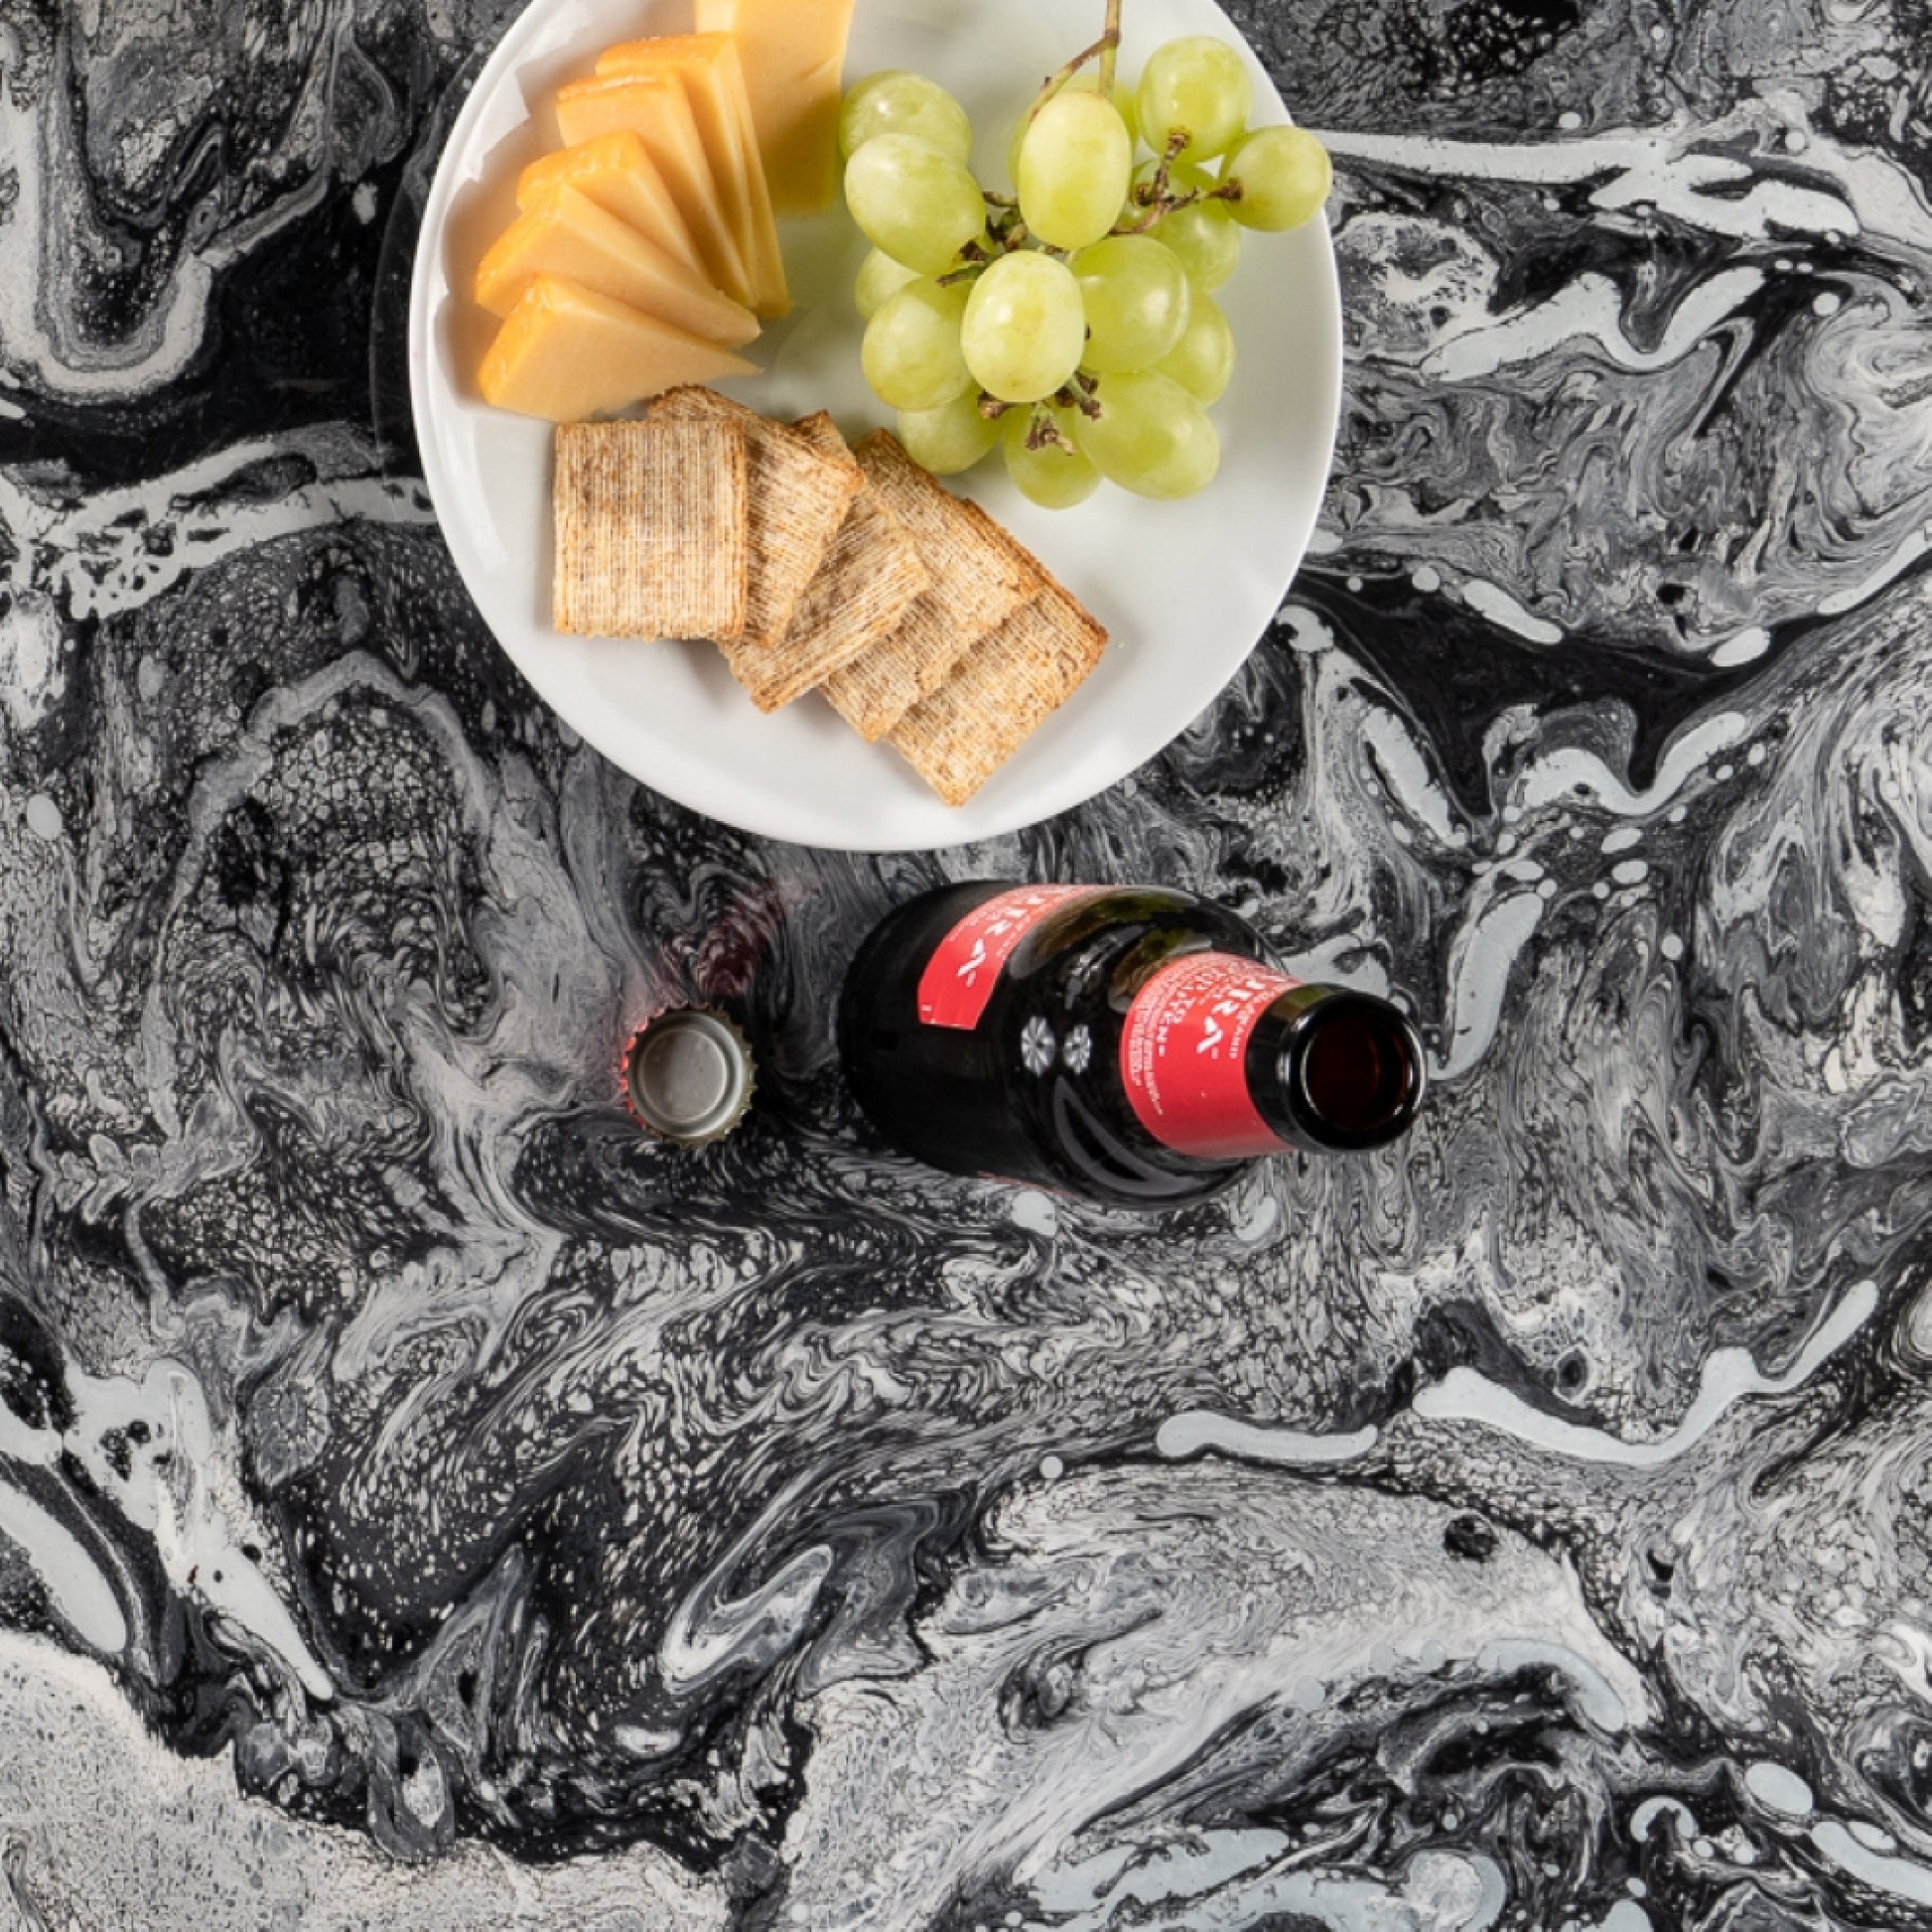 Elevate Your Style: POLAR WHITE ALLOY - Timeless Sophistication for Any Countertop